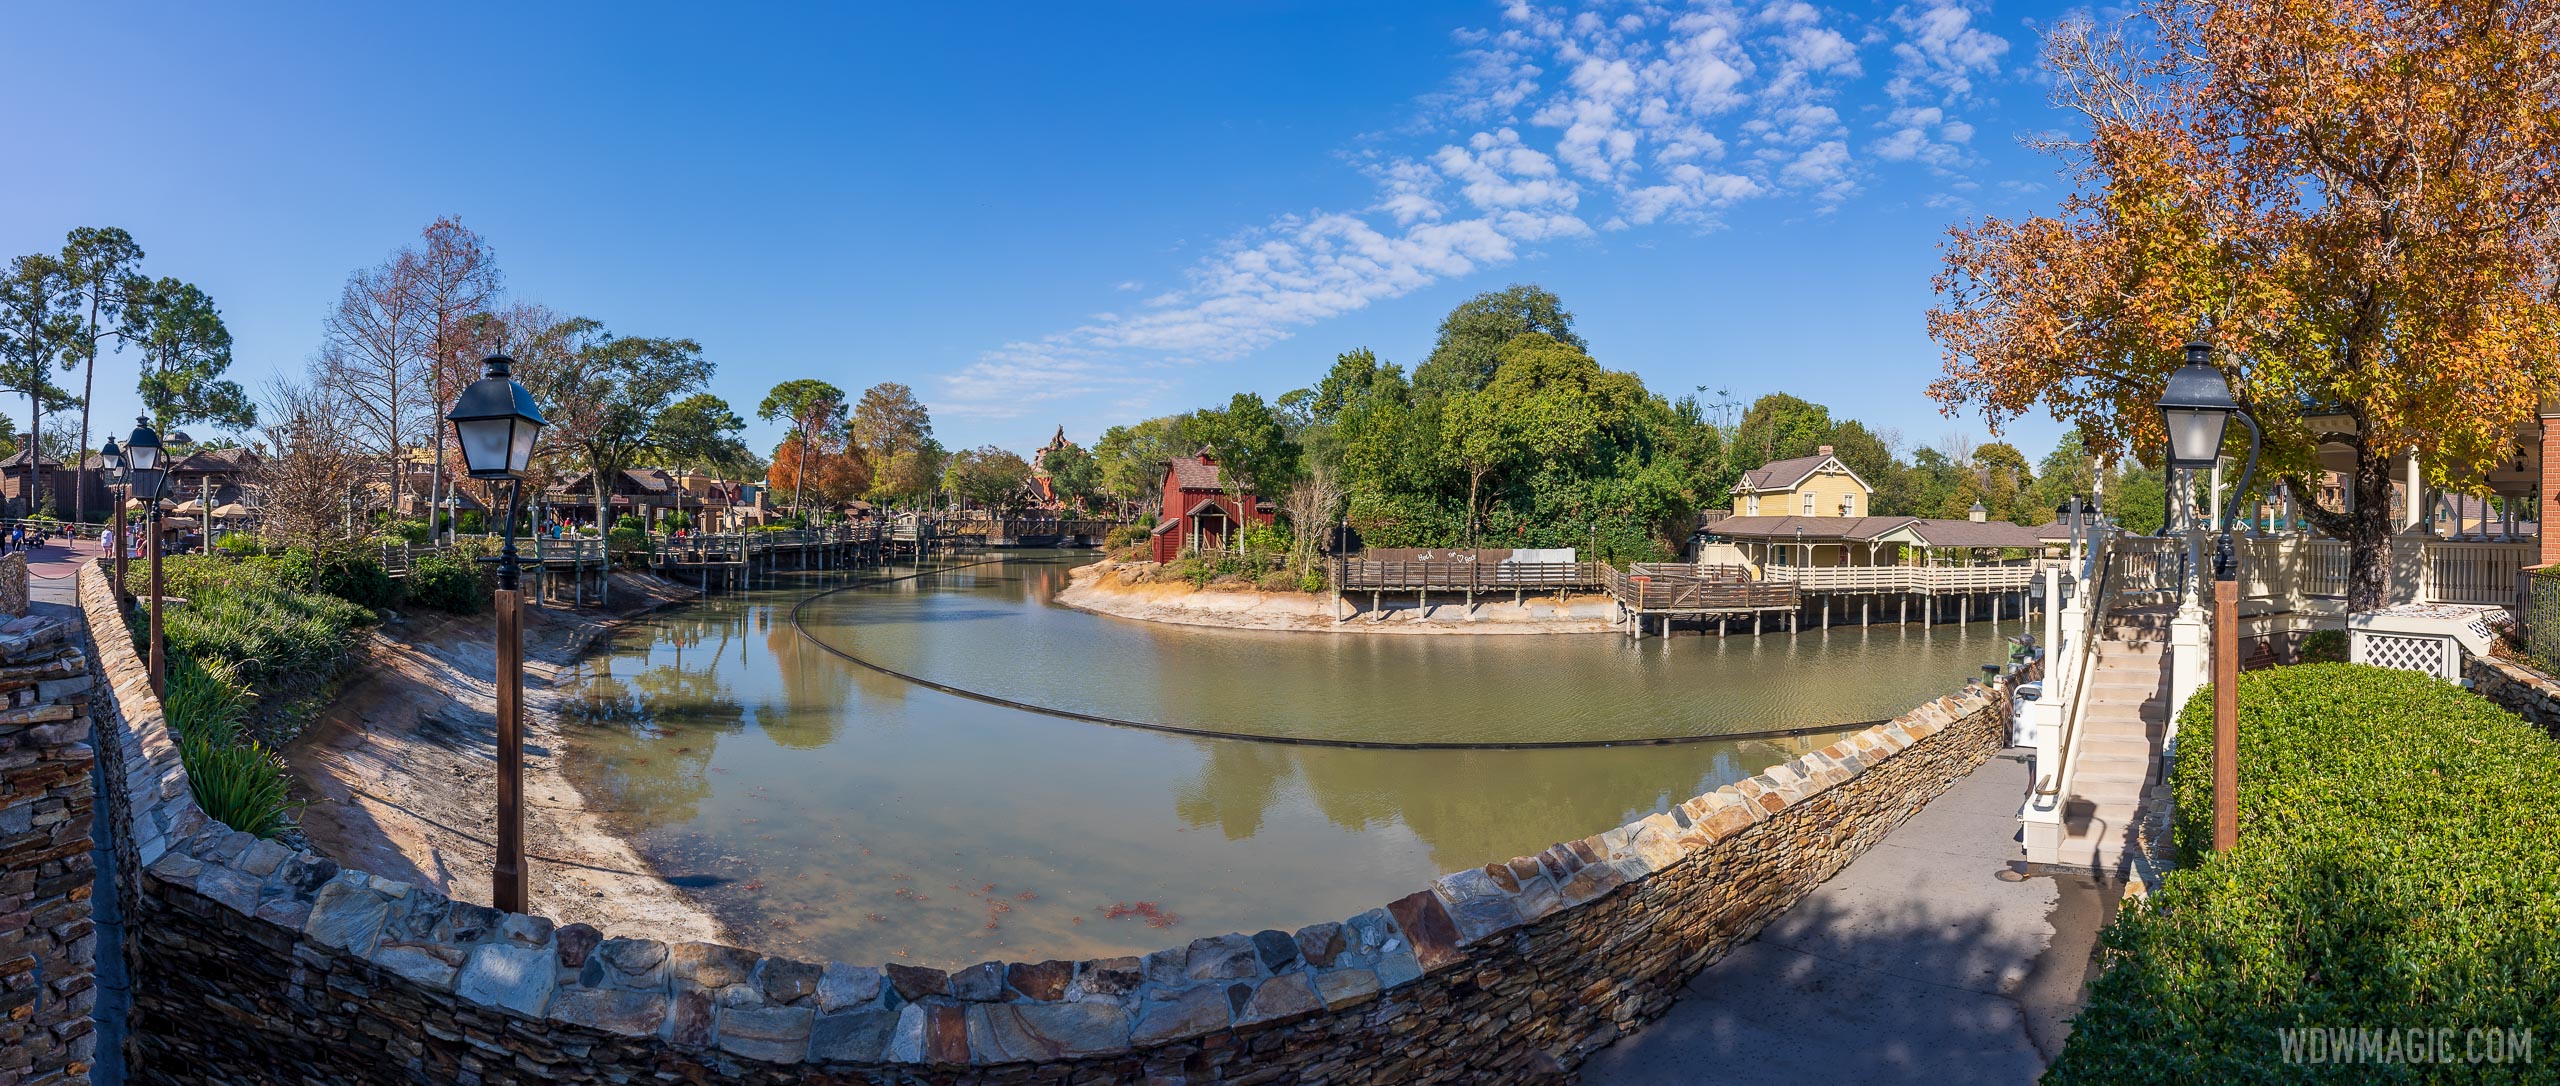 Liberty Square Riverboat and Tom Sawyer Island to reopen February 5